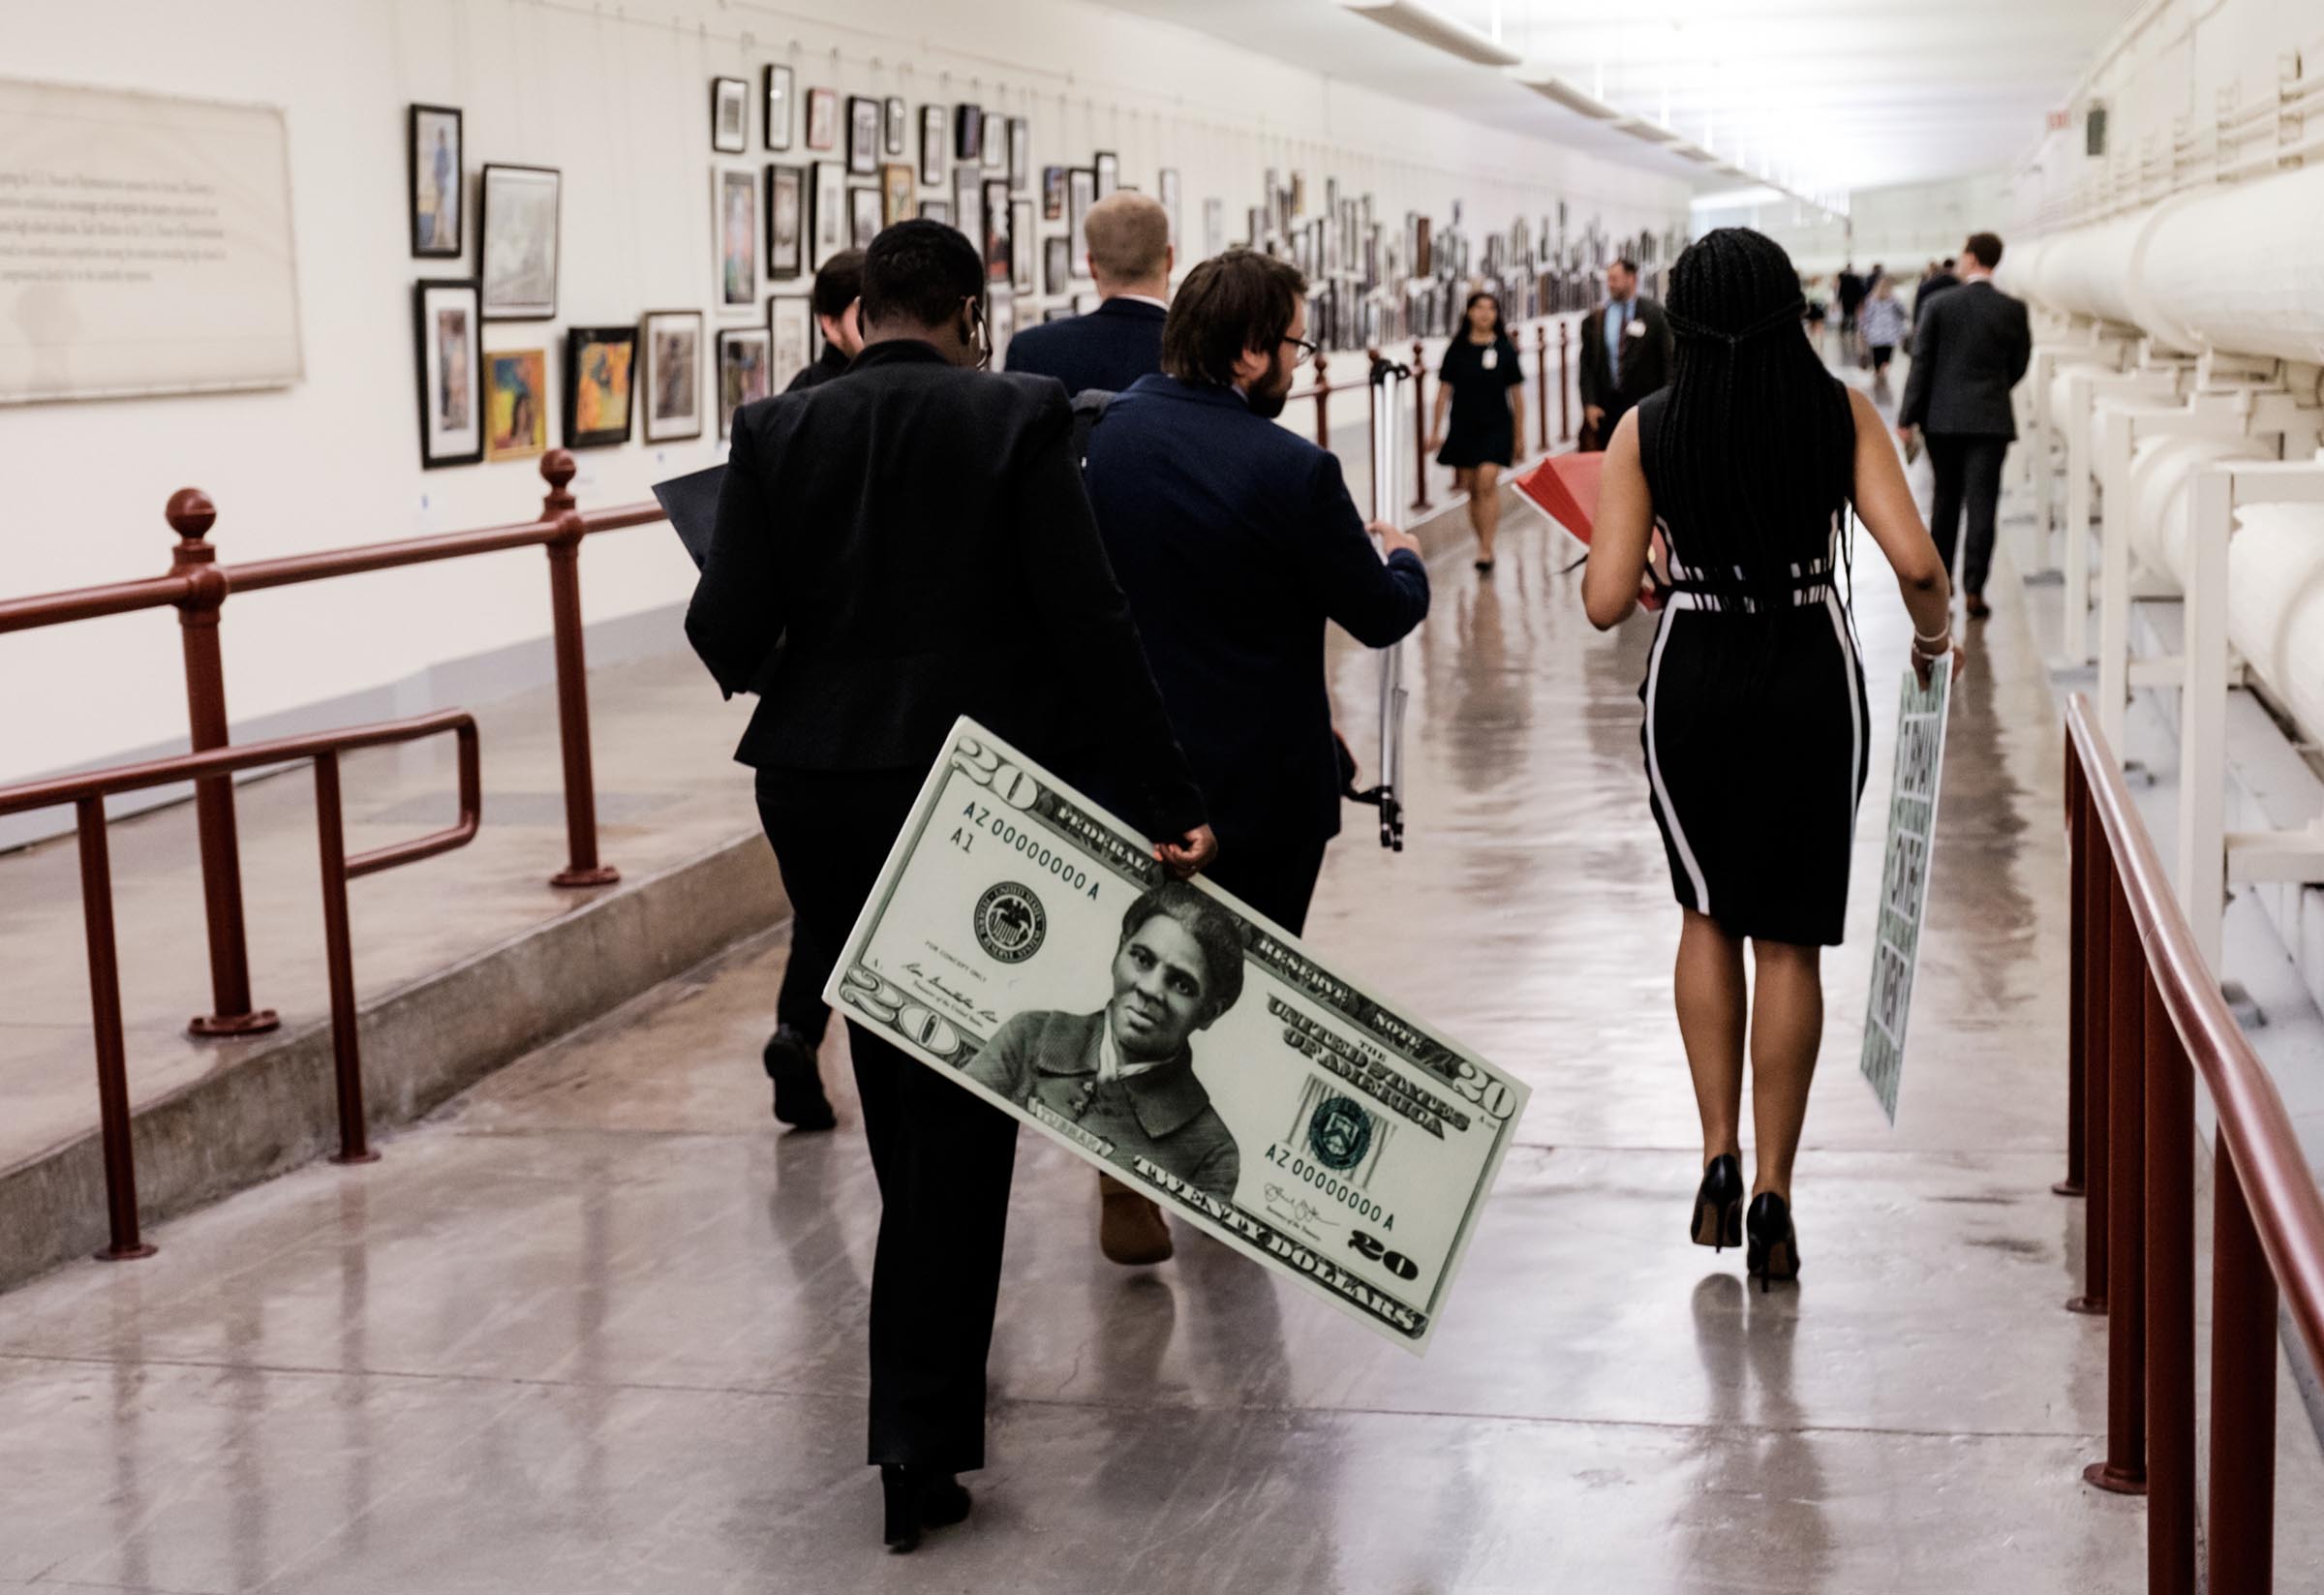 A congressional staffer departs holding a visual aid following a news conference regarding the redesigned $20 bill meant to honor Harriet Tubman, on Capitol Hill in Washington, D.C., on June 18, 2019. (Michael A. McCoy—The New York Times/Redux)